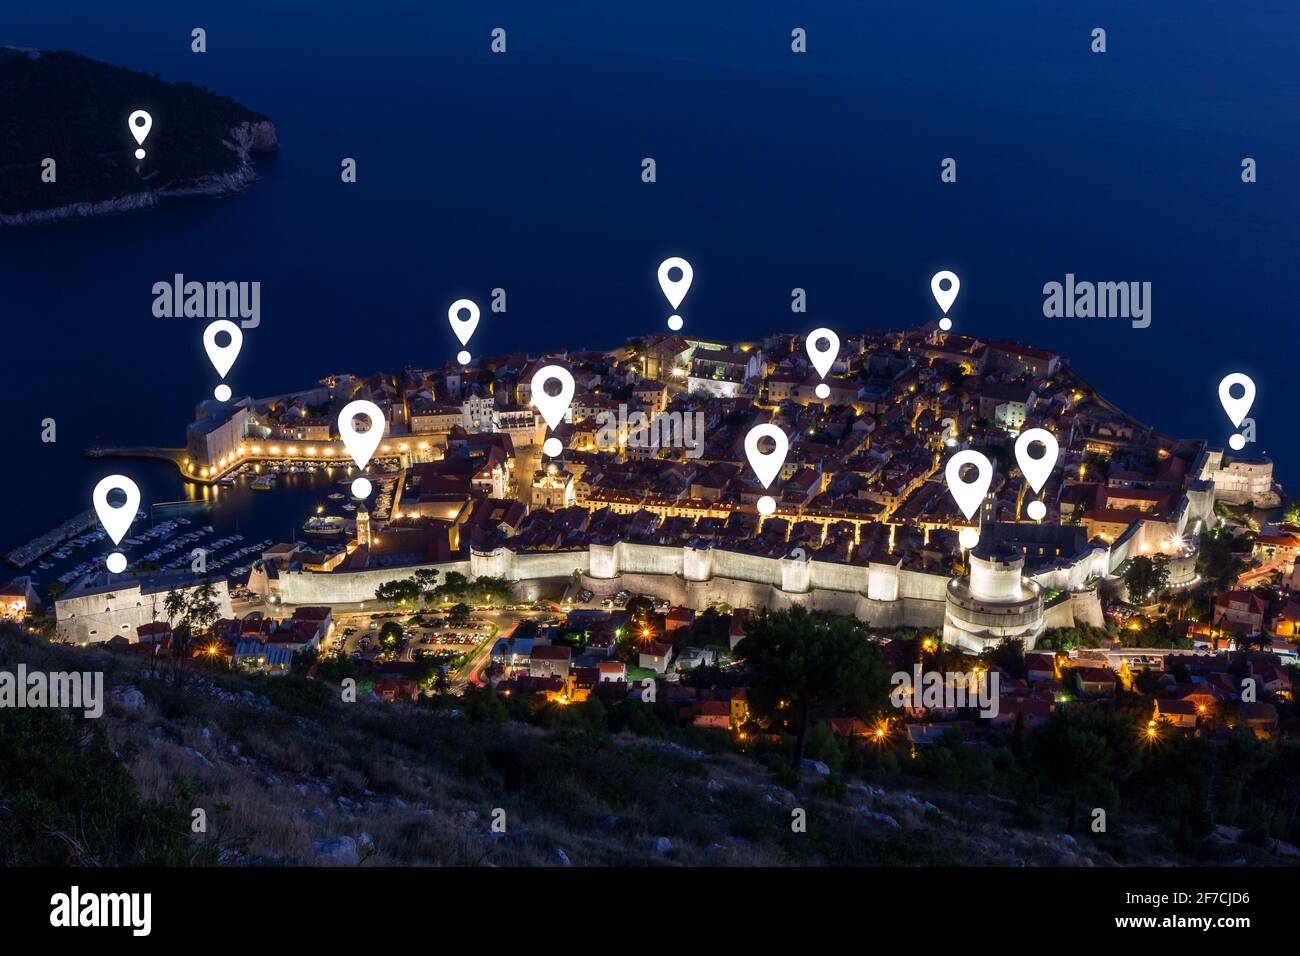 Map pin icons on Dubrovnik's cityscape at dusk. Walled Old Town of Dubrovnik in Croatia viewed from above at night. Stock Photo